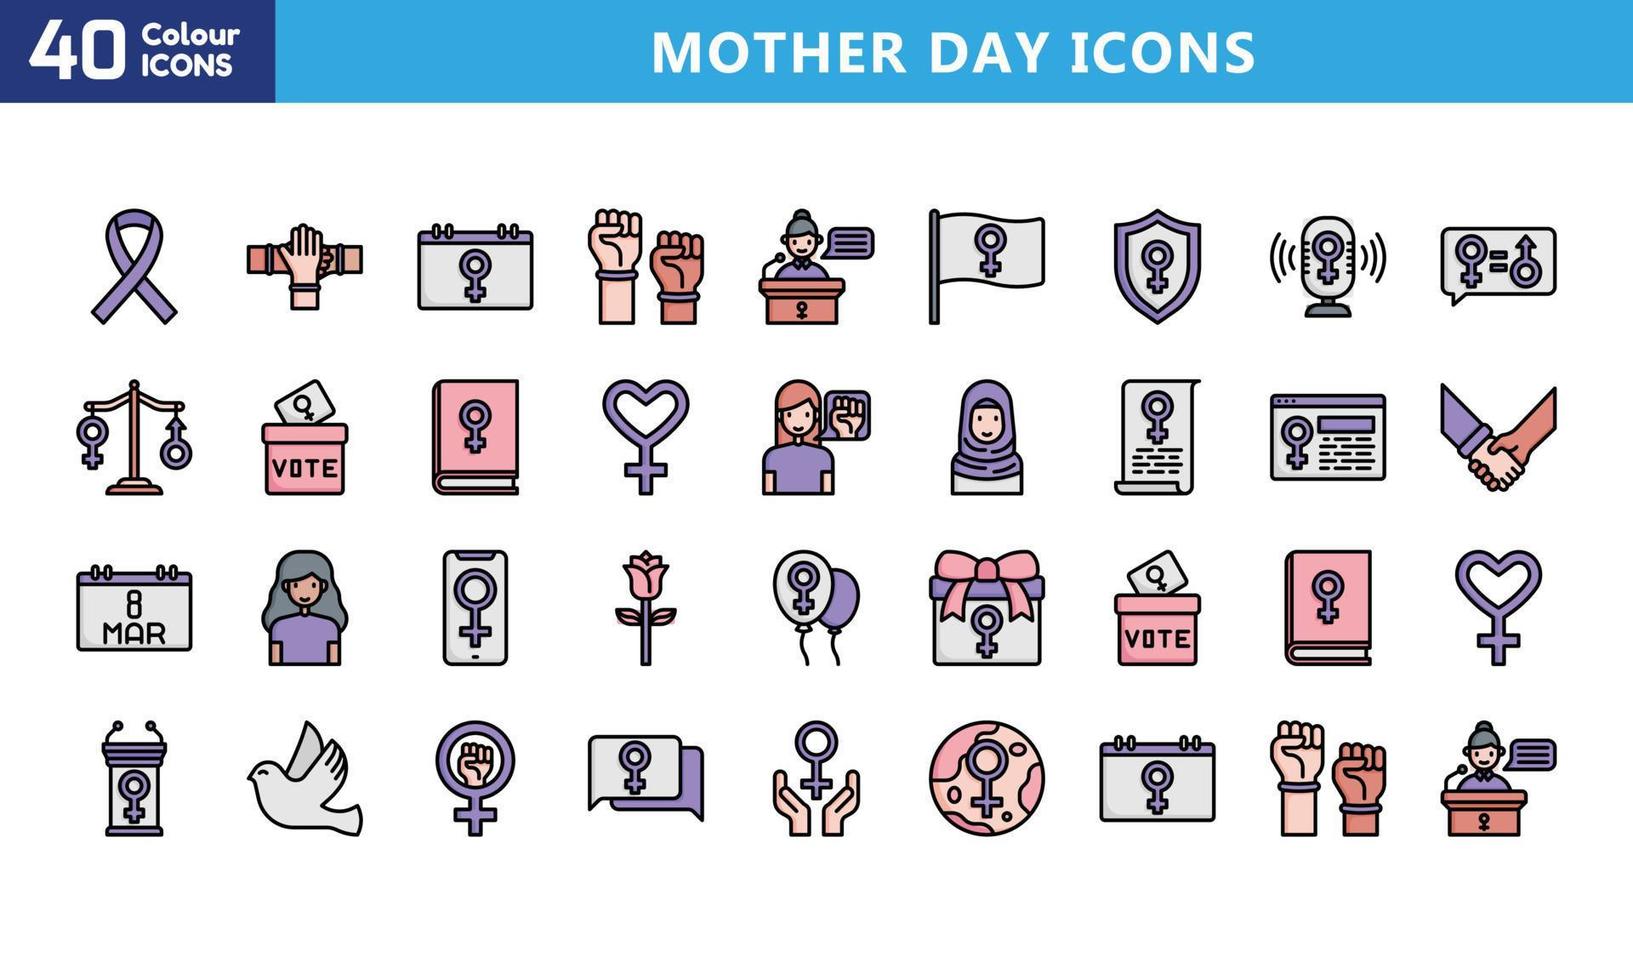 Icons for mobile and web. High quality pictograms. Linear icons set of business, medical, UI and UX, media, money, travel, etc. vector